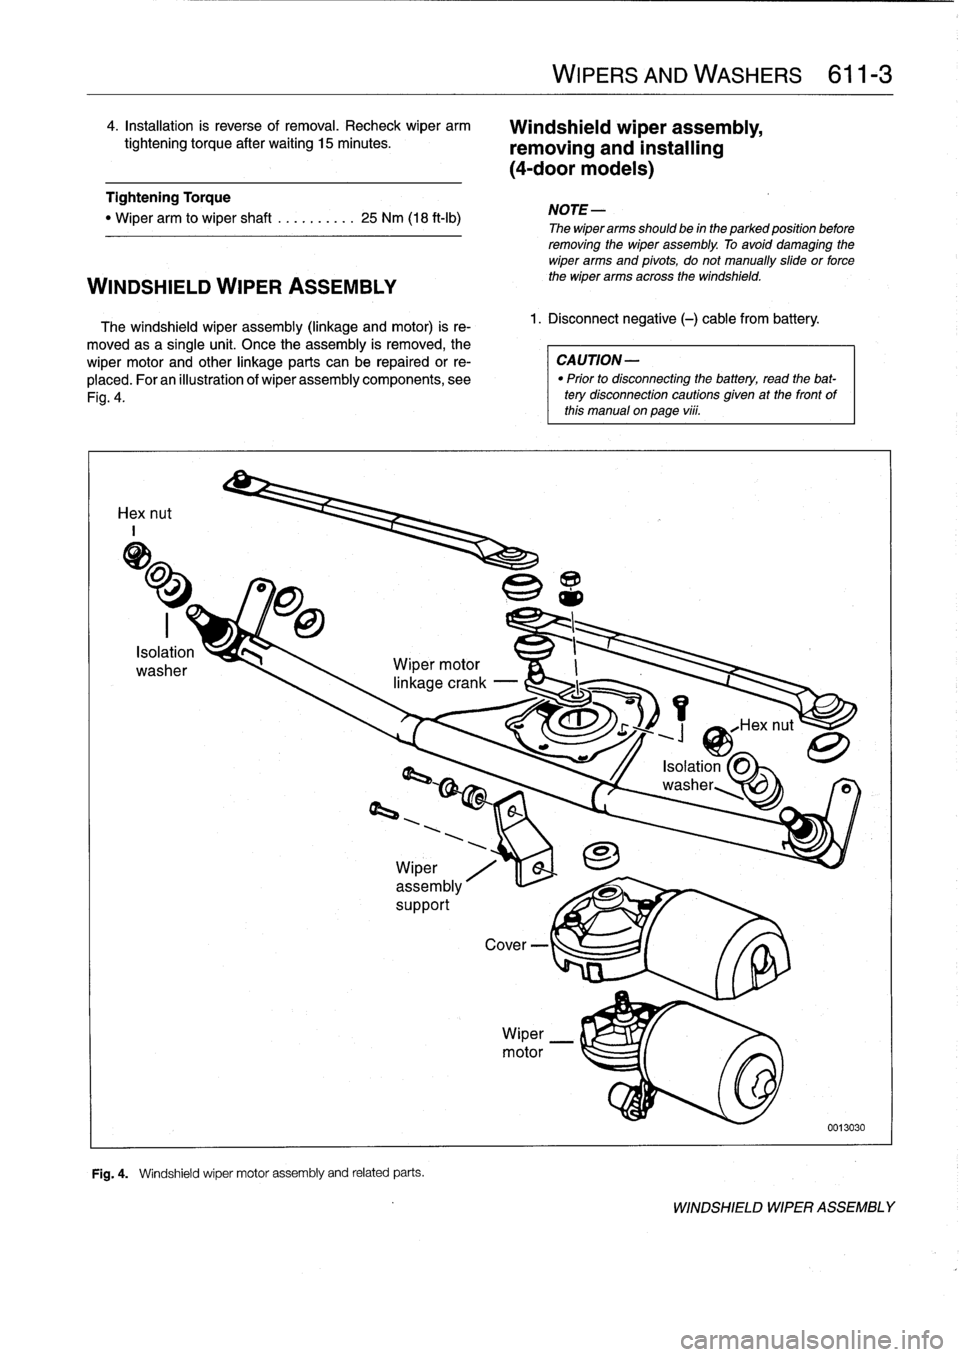 BMW 325i 1994 E36 Workshop Manual 
4
.
Installation
is
reverse
of
removal
.
Recheck
wiper
arm

tightening
torque
after
waiting
15minutes
.

Tightening
Torque

"
Wiper
arm
to
wiper
shaft
..........
25
Nm
(18
ft-Ib)

WINDSHIELD
WIPER
AS